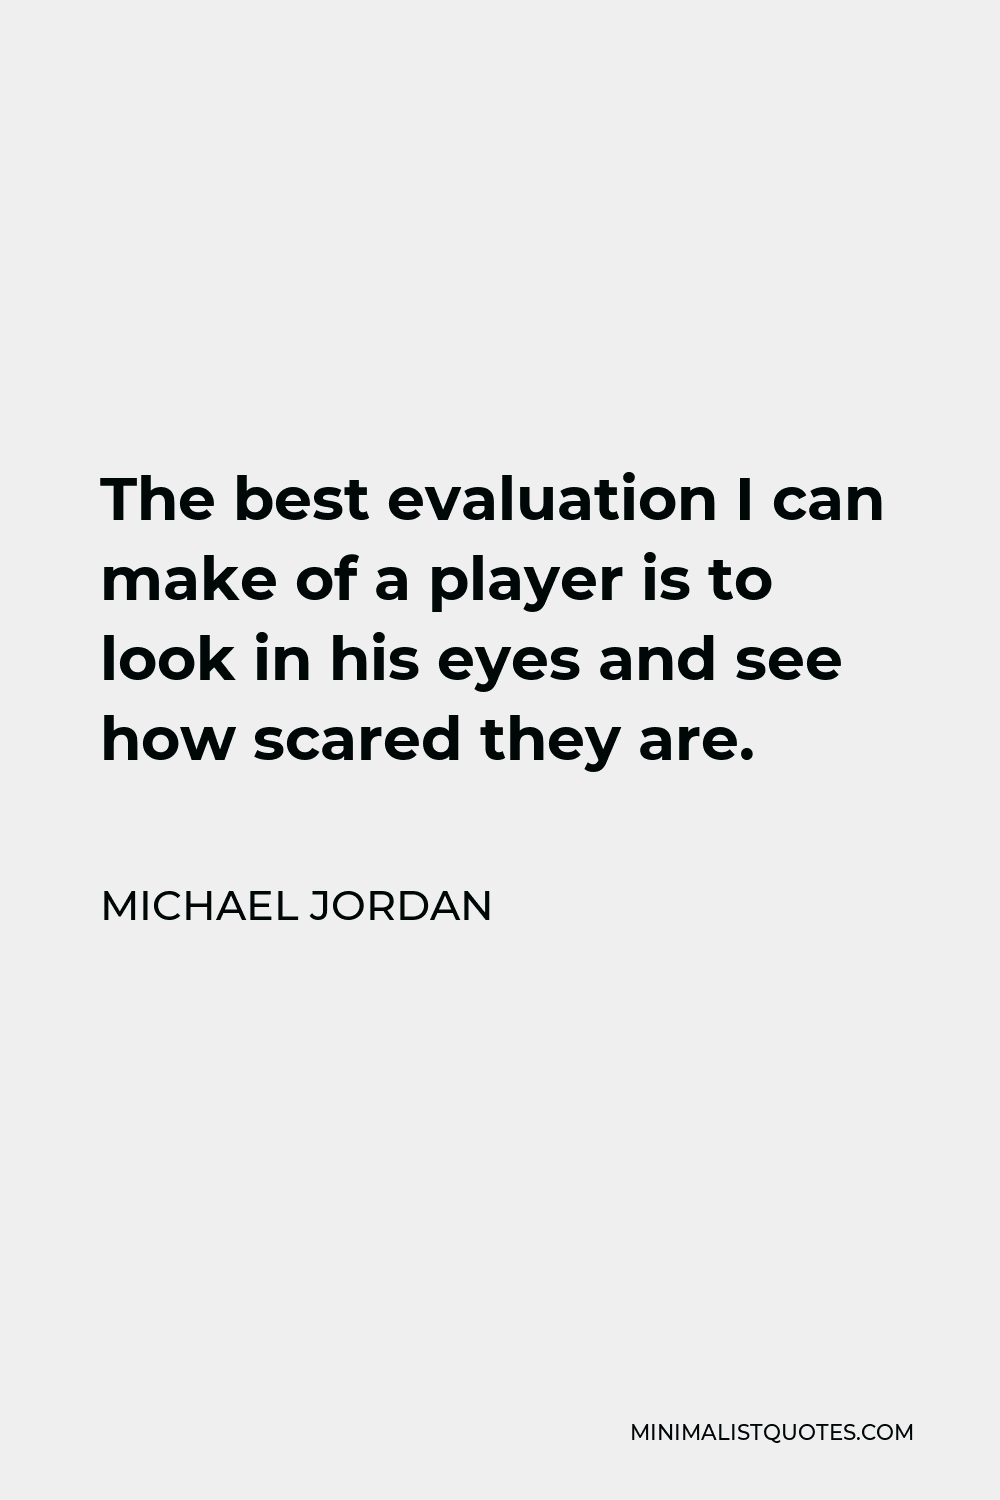 Michael Jordan Quote - The best evaluation I can make of a player is to look in his eyes and see how scared they are.